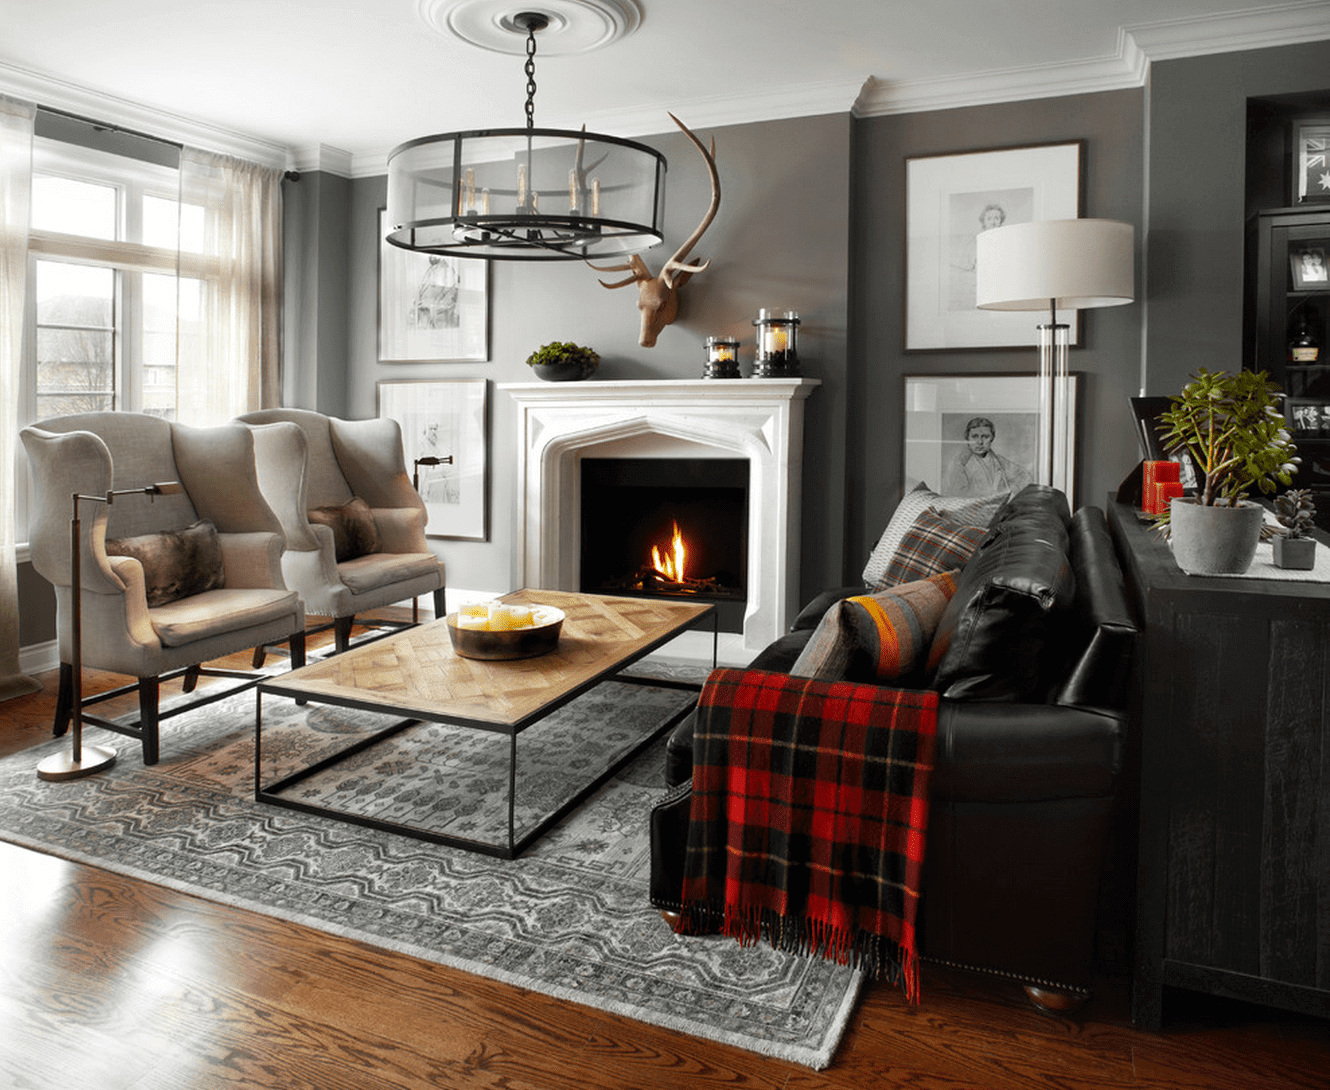 Cozy Living Room Decorating: Create A Warm And Inviting Space